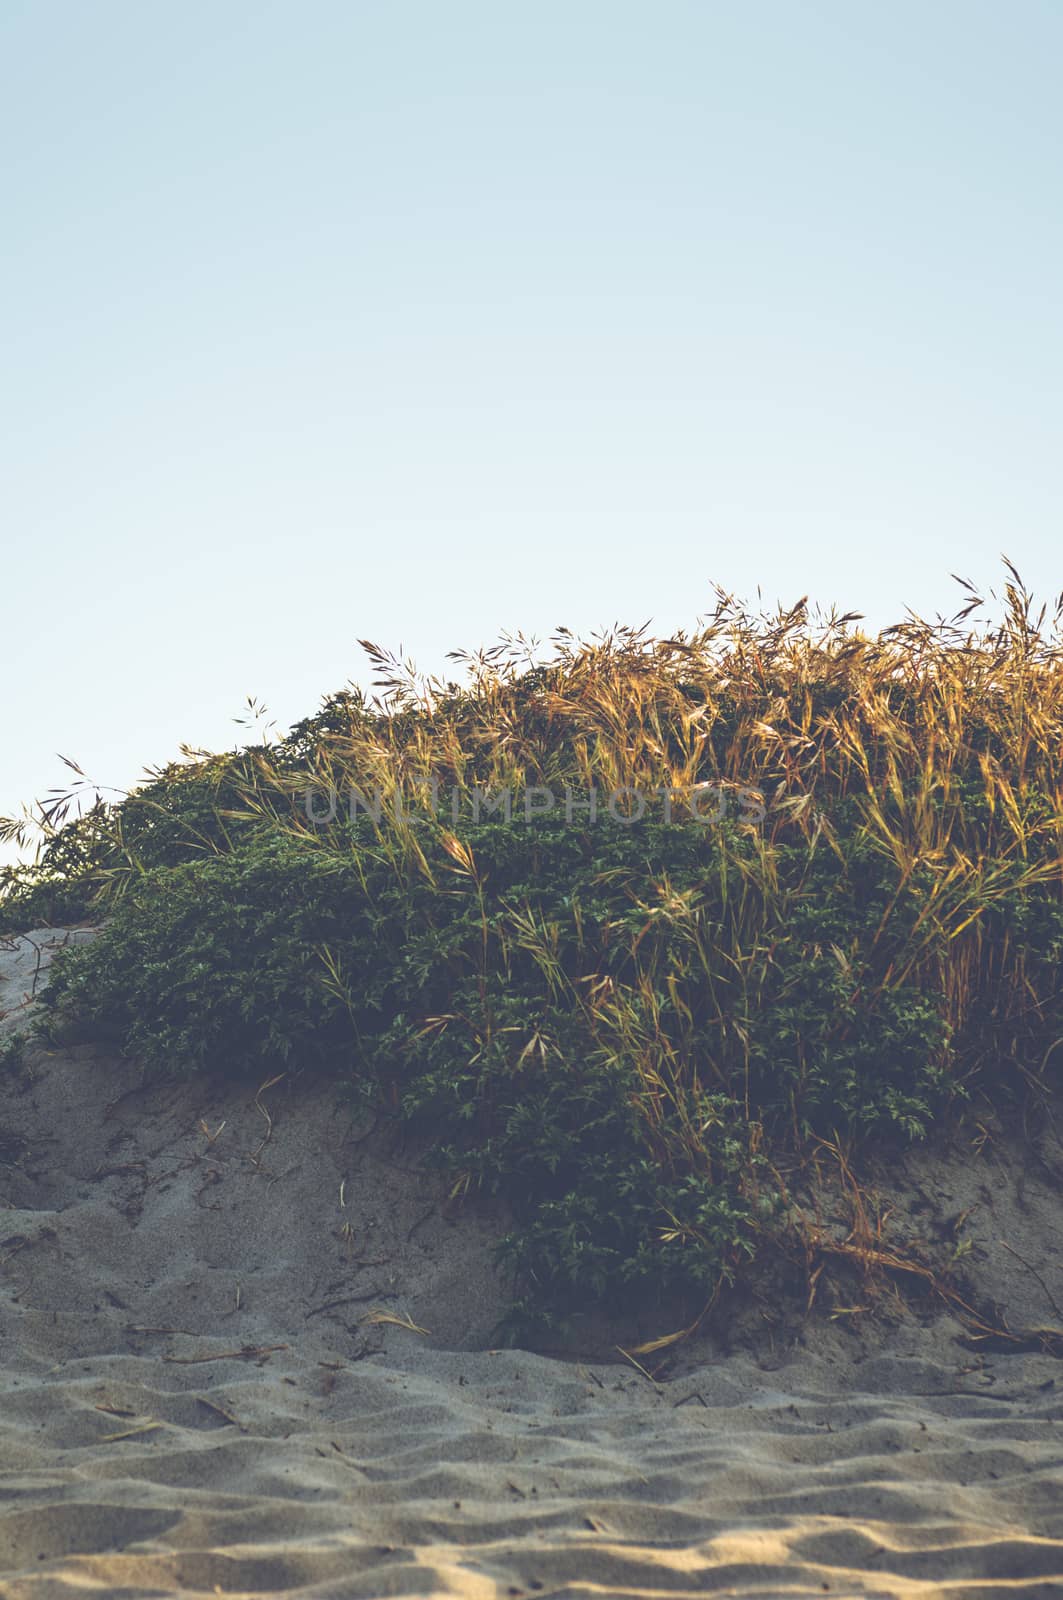 Landscape photograph of a sandy beach with grass and green plants.